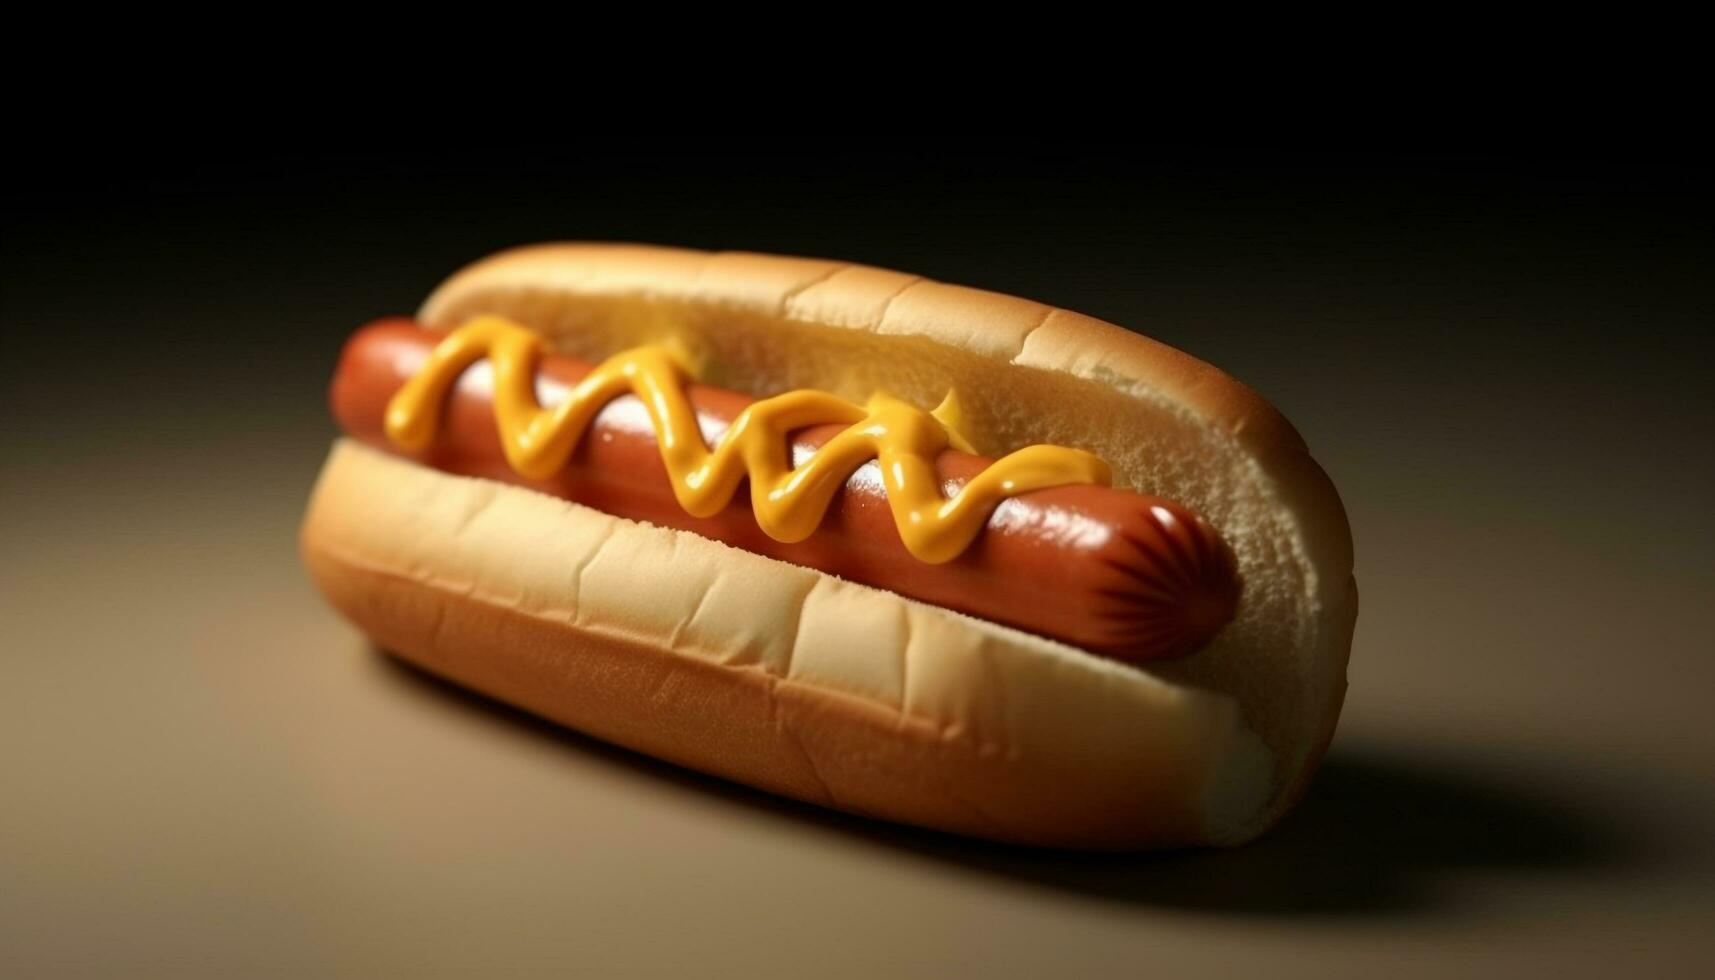 Grilled hot dog on bun, a classic American meal generated by AI photo